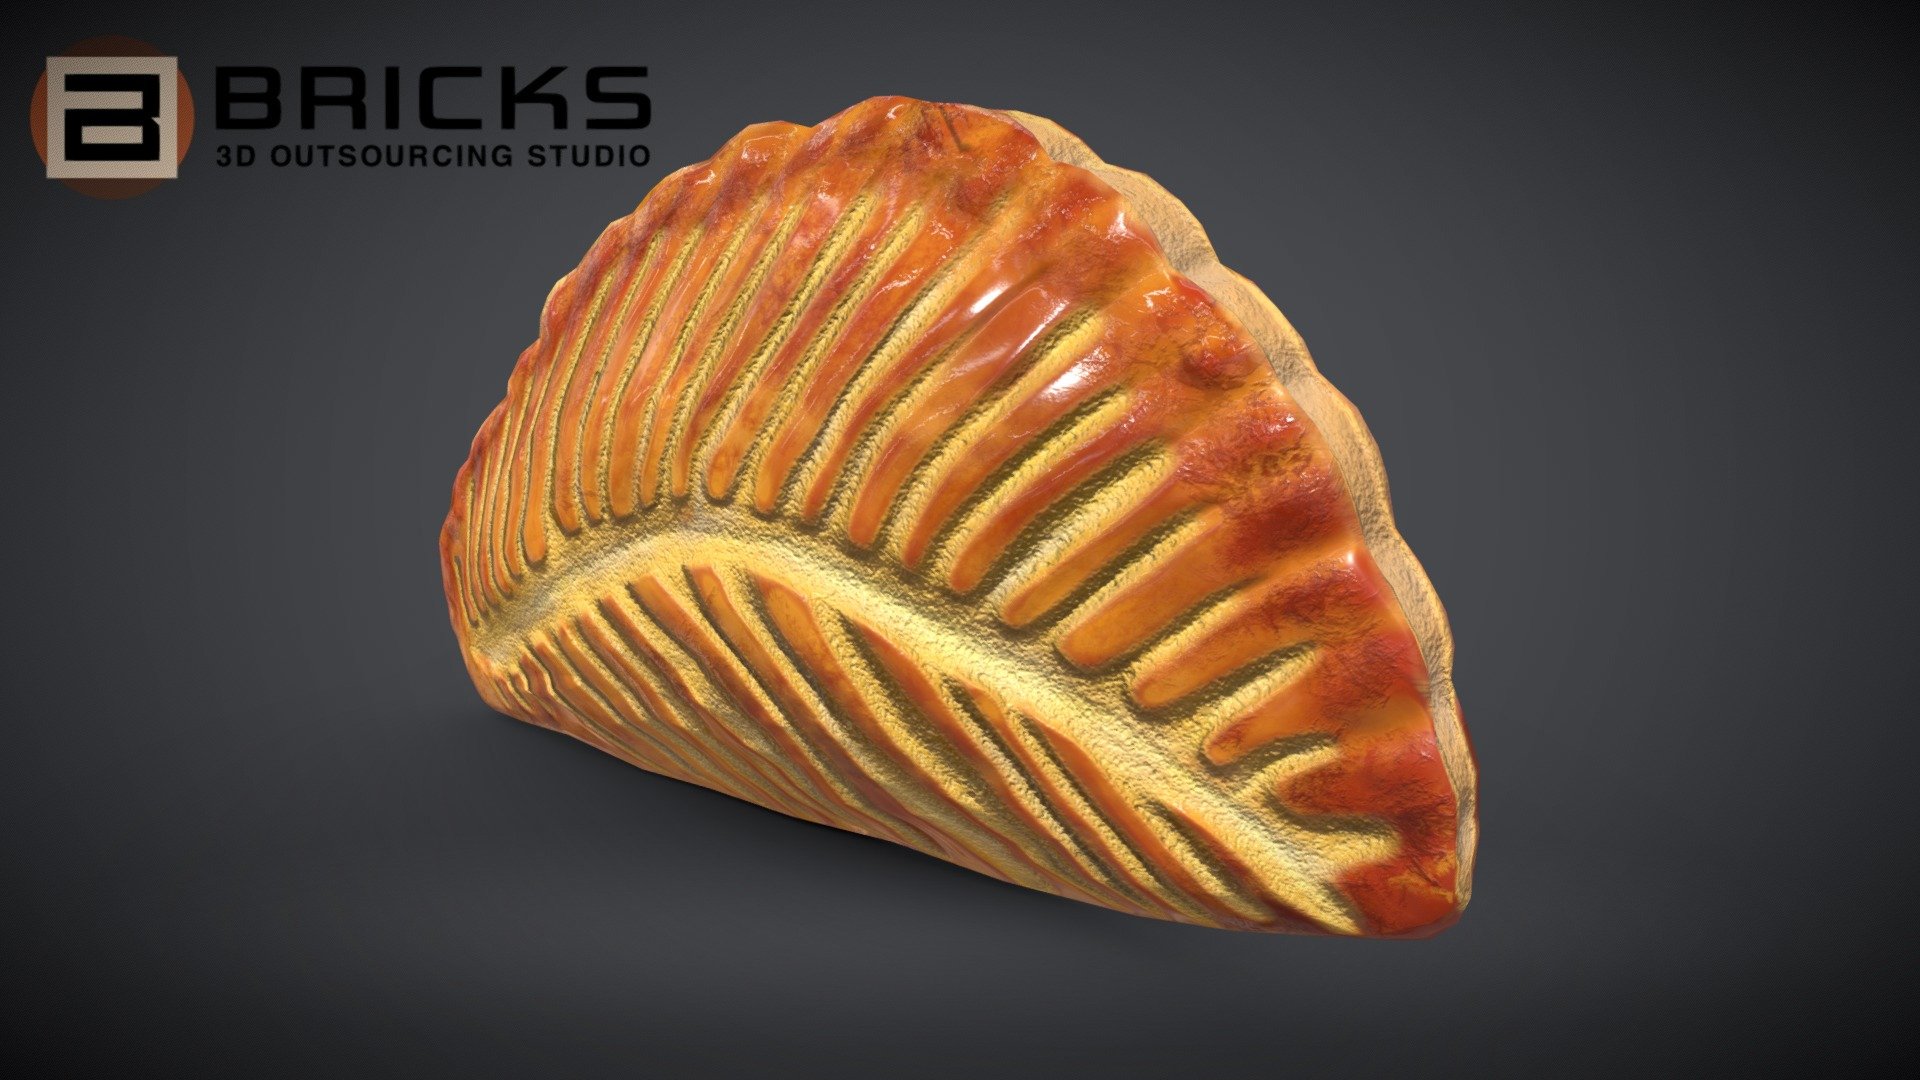 PBR Food Asset:
TurnoverApple
Polycount: 1000
Vertex count: 584
Texture Size: 2048px x 2048px
Normal: OpenGL

If you need any adjust in file please contact us: team@bricks3dstudio.com

Hire us: tringuyen@bricks3dstudio.com
Here is us: https://www.bricks3dstudio.com/
        https://www.artstation.com/bricksstudio
        https://www.facebook.com/Bricks3dstudio/
        https://www.linkedin.com/in/bricks-studio-b10462252/ - TurnoverApple - Buy Royalty Free 3D model by Bricks Studio (@bricks3dstudio) 3d model